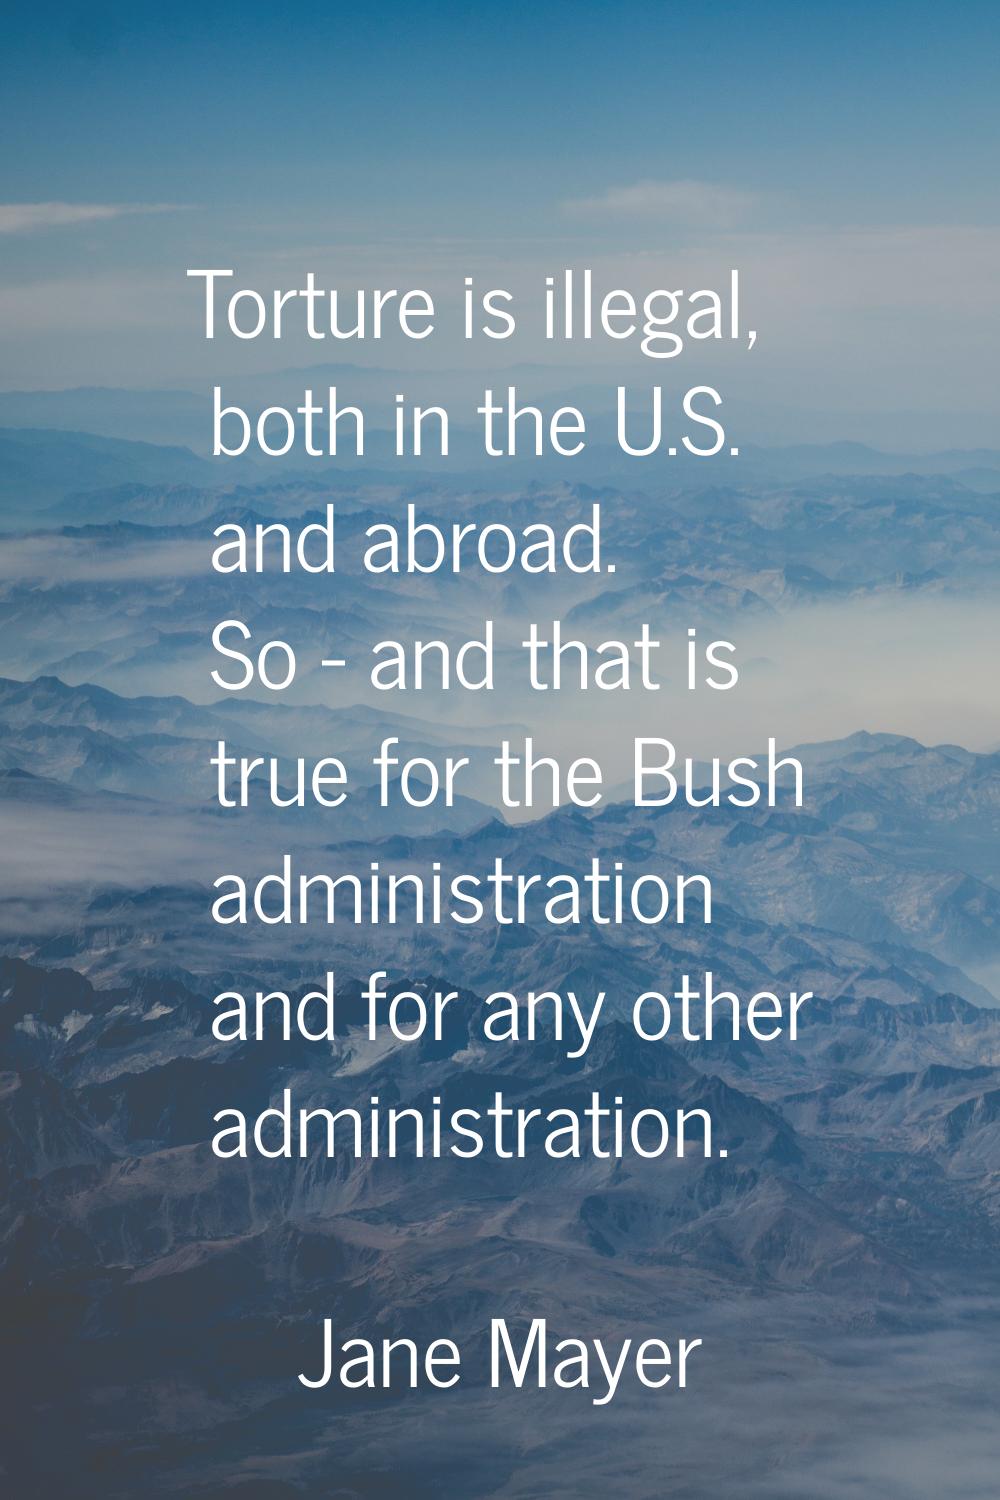 Torture is illegal, both in the U.S. and abroad. So - and that is true for the Bush administration 